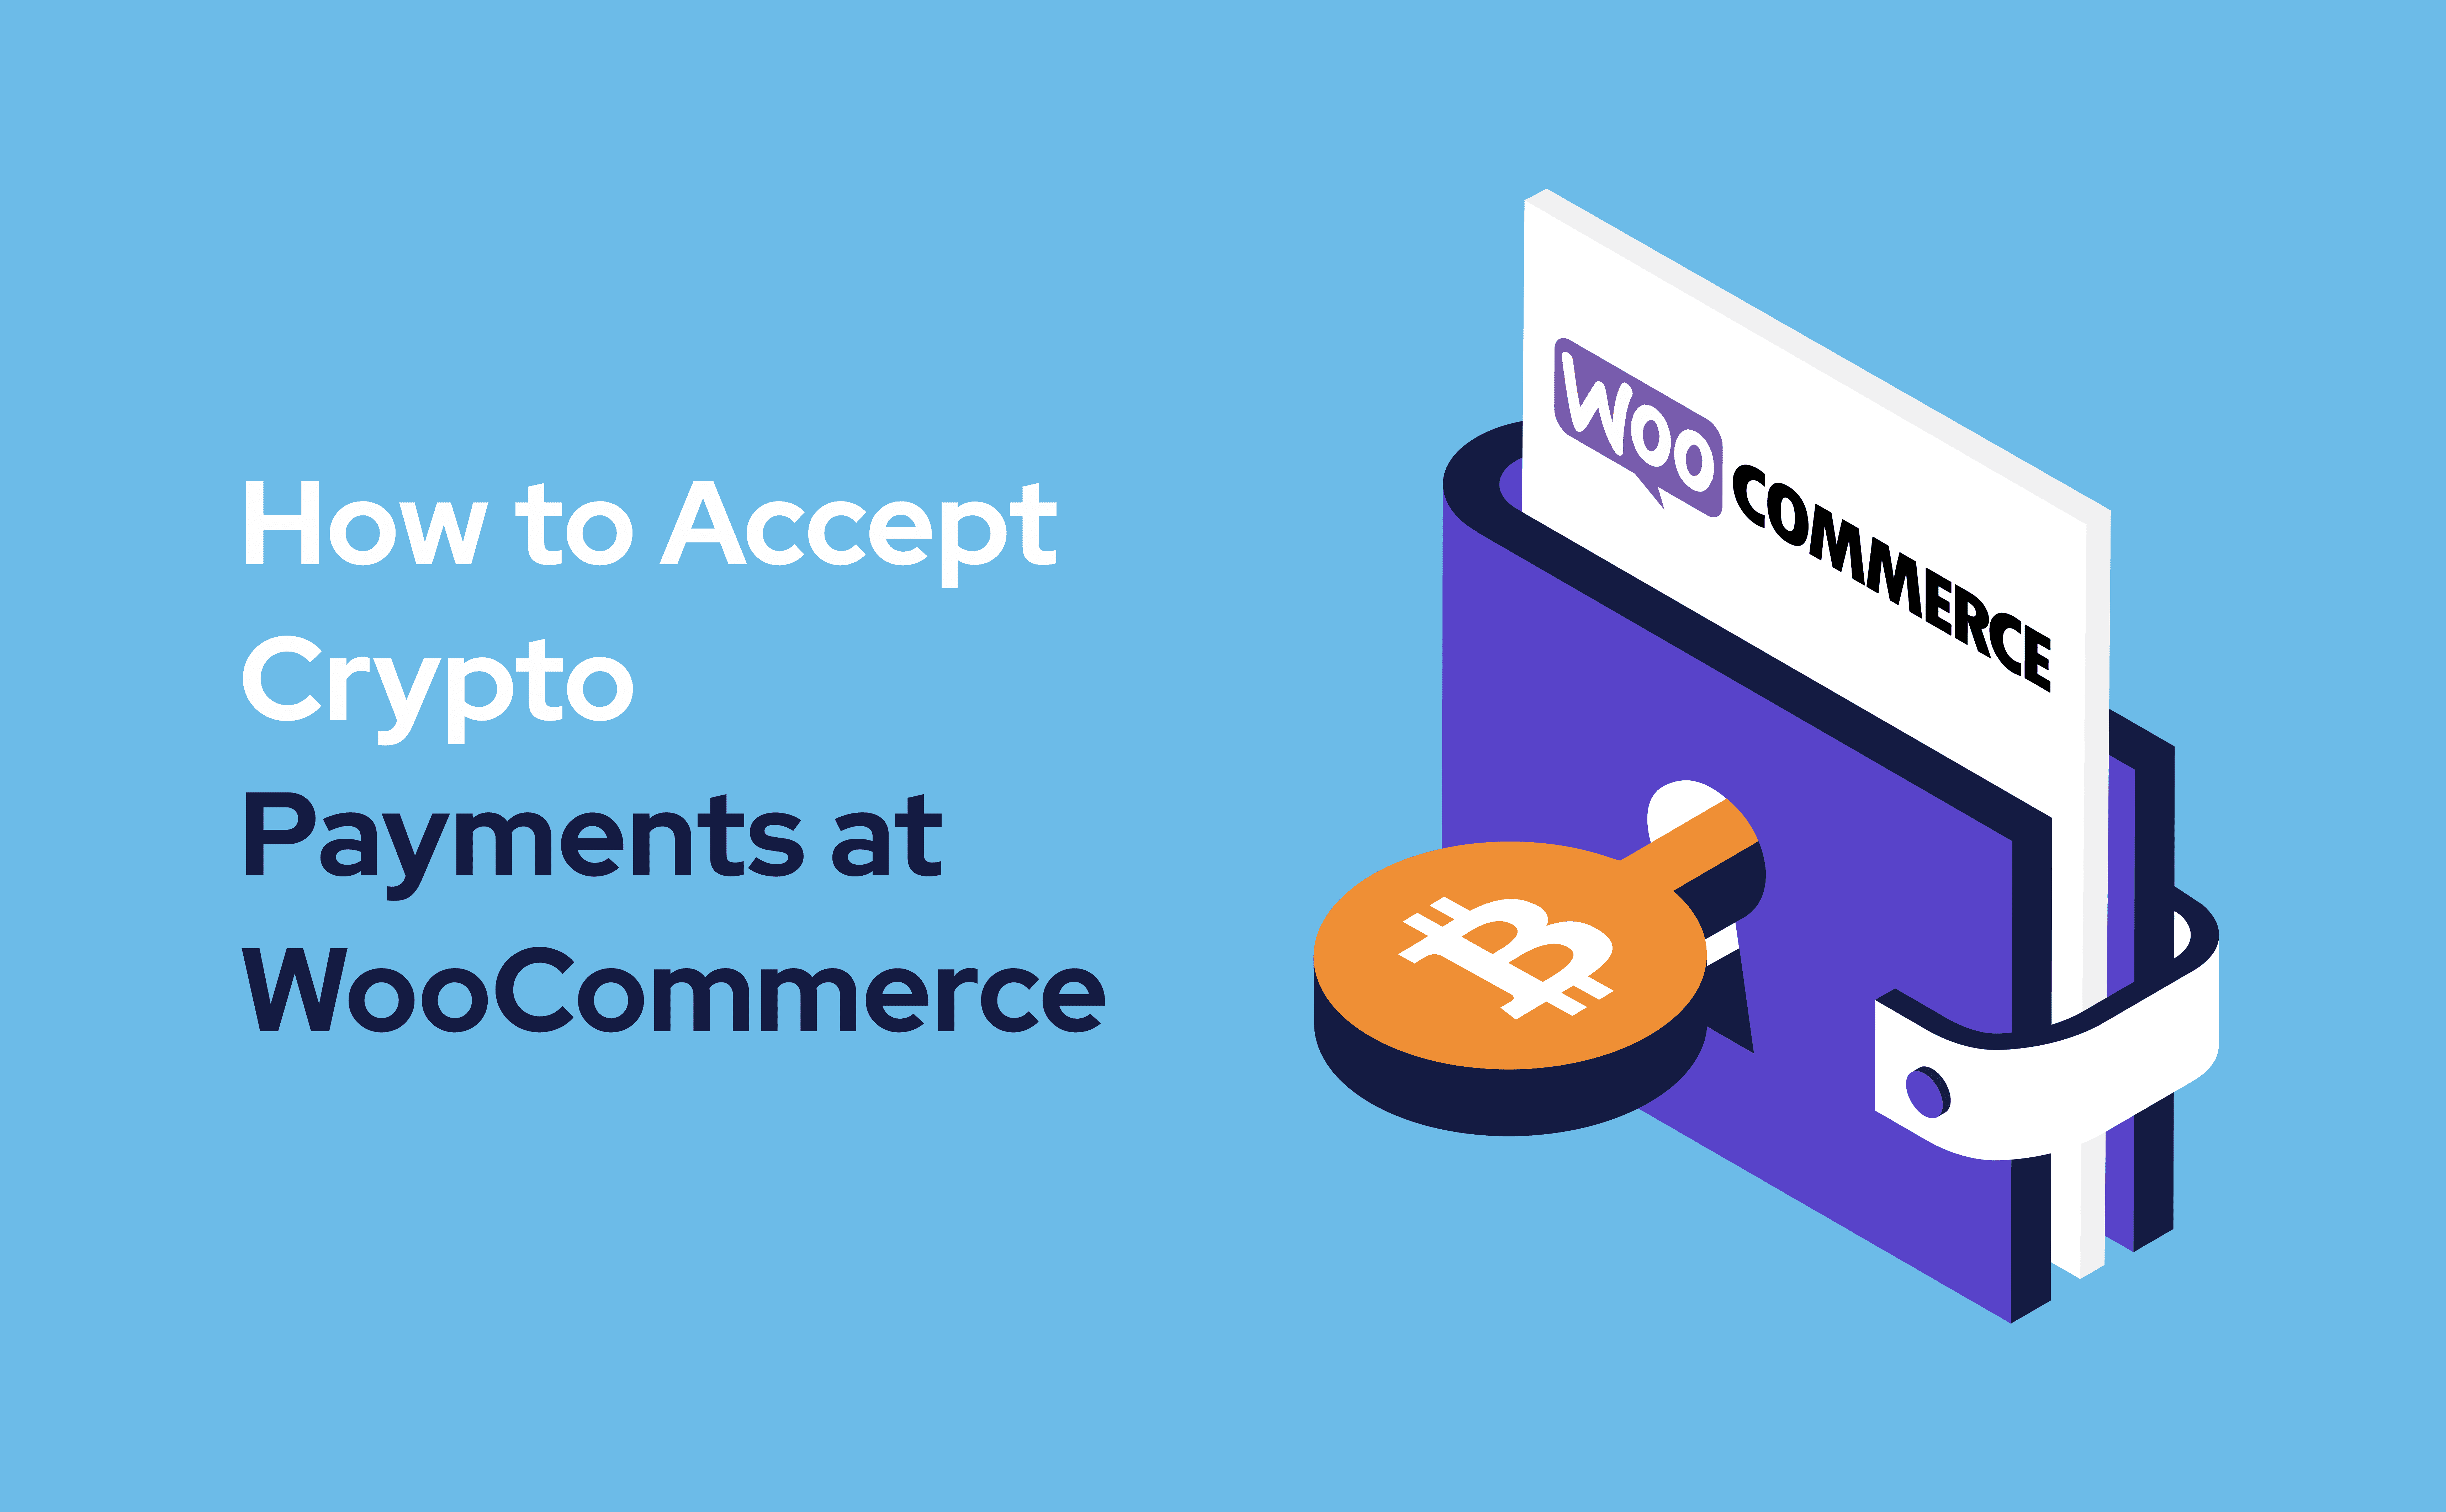 How to Accept Crypto Payments at WooCommerce